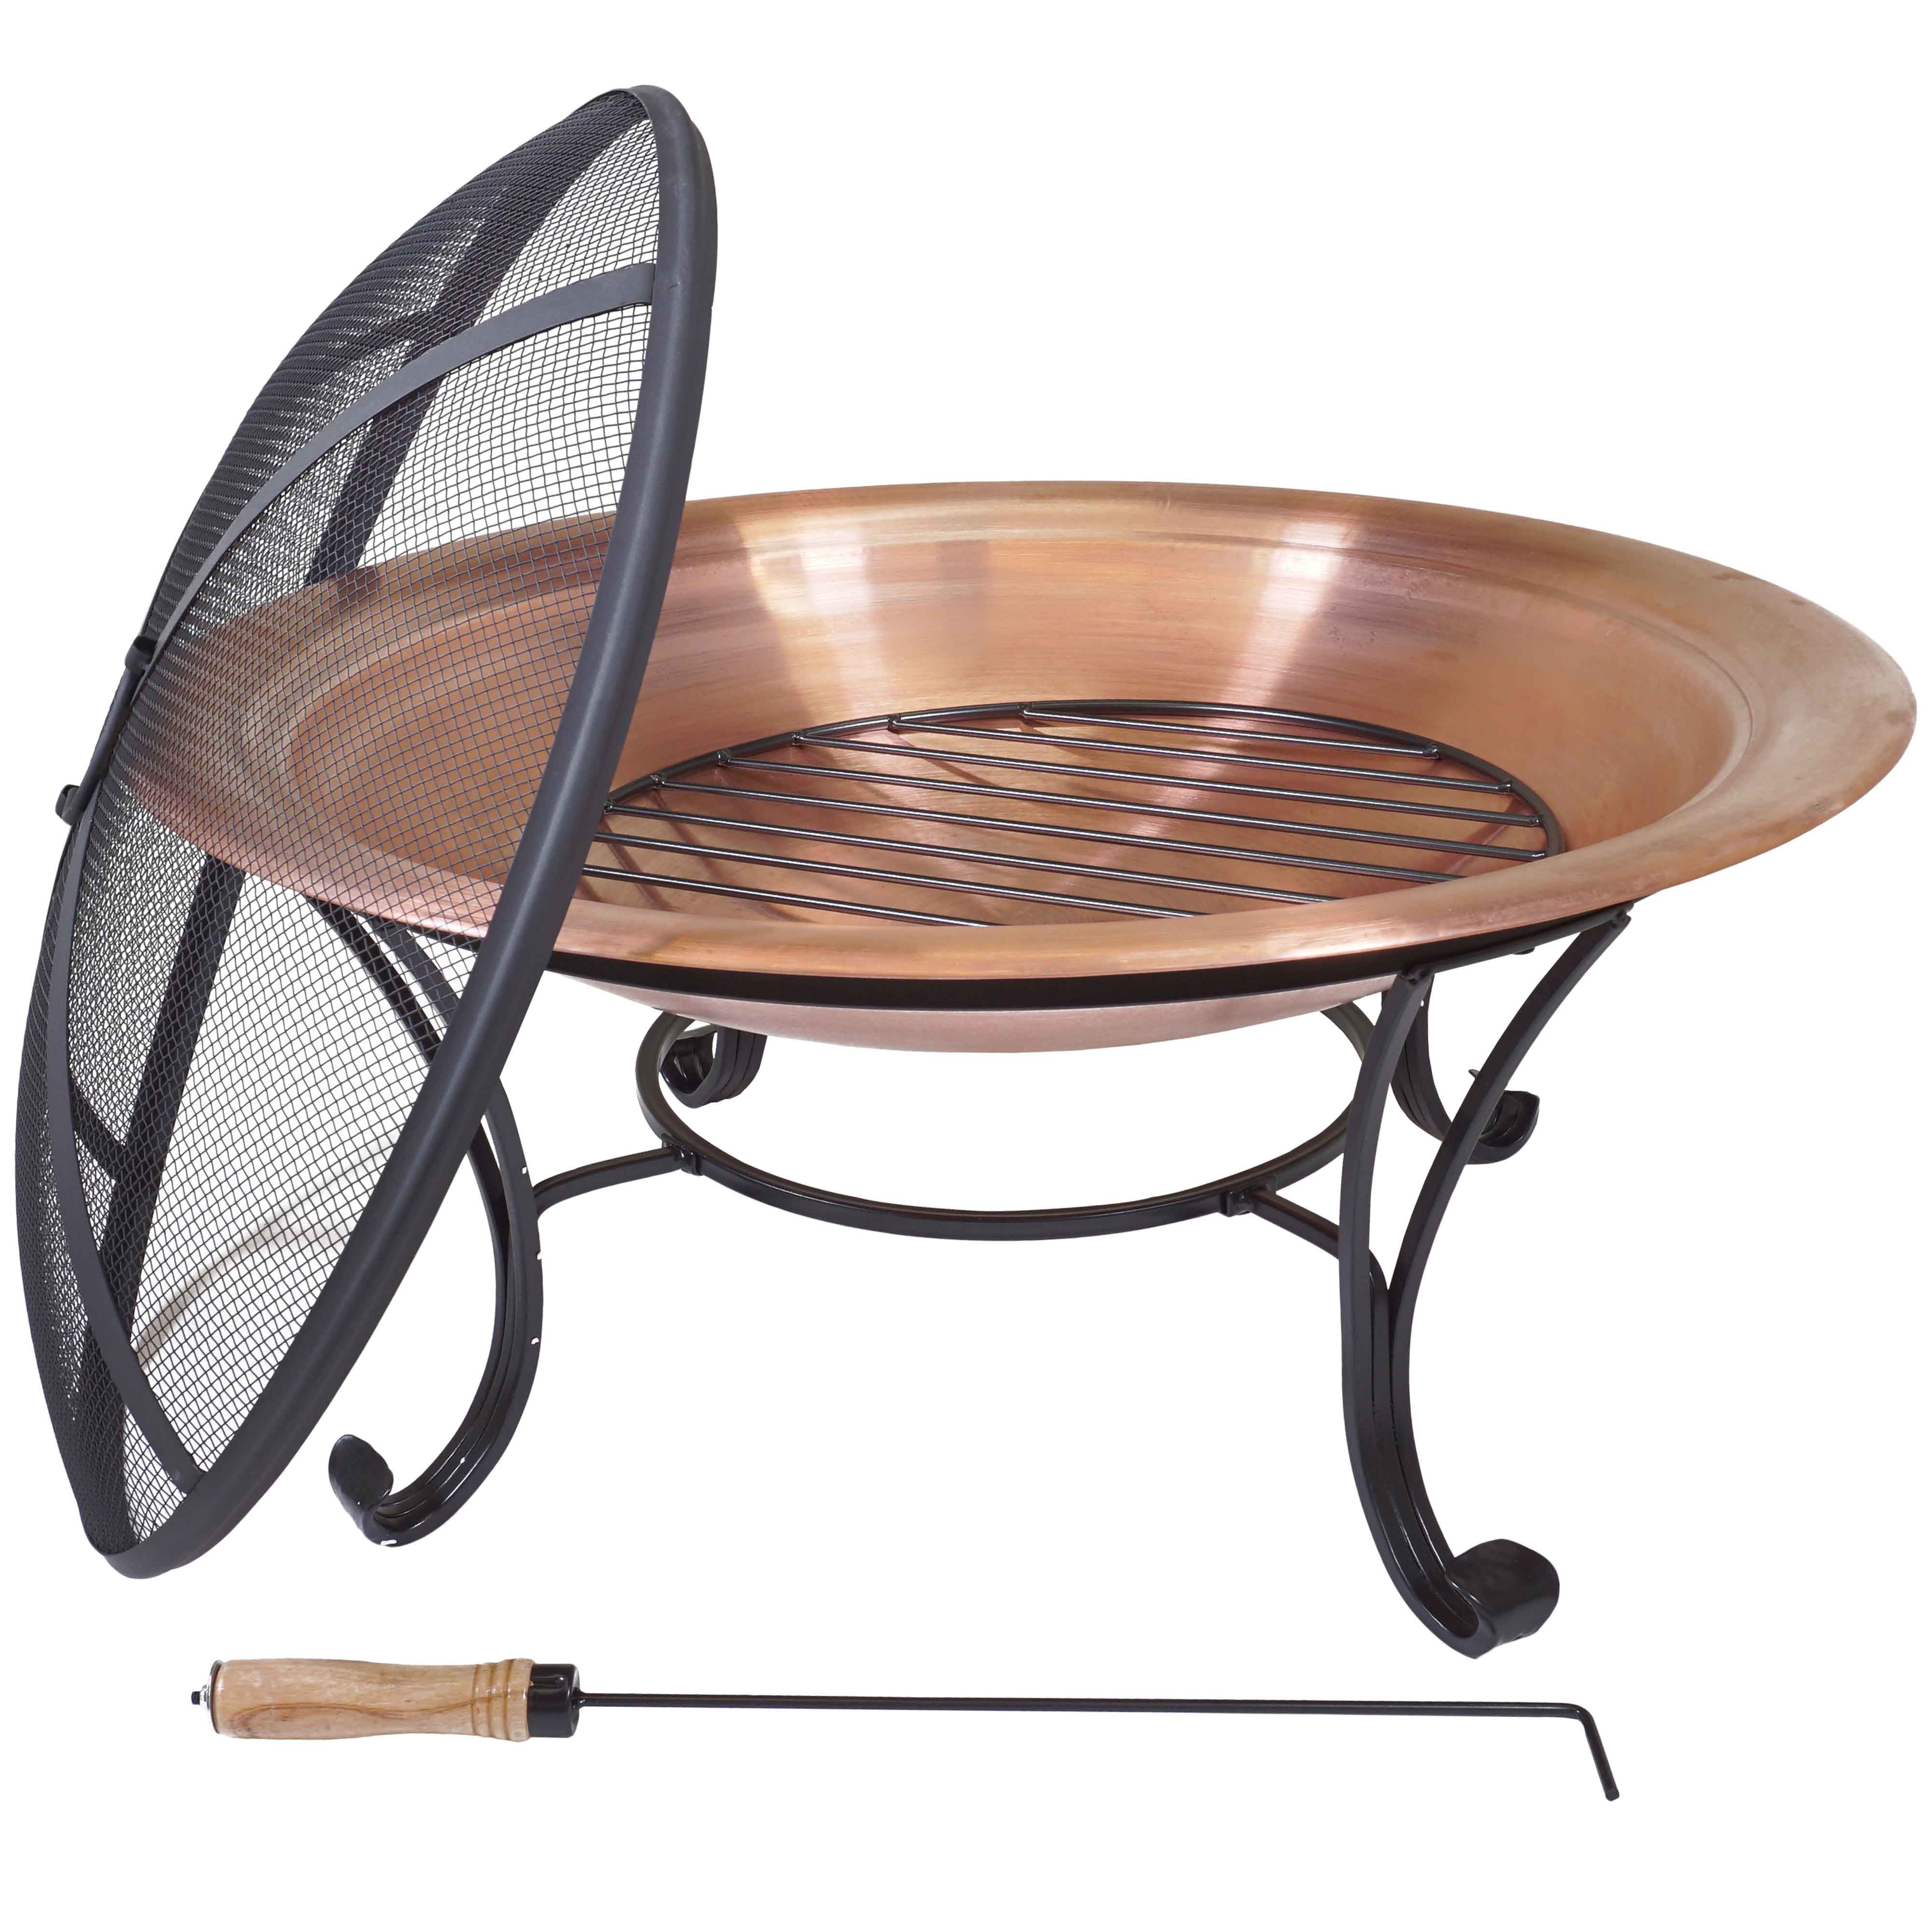 Copper Fire Ring Outdoor Pit, Copper Fire Pit